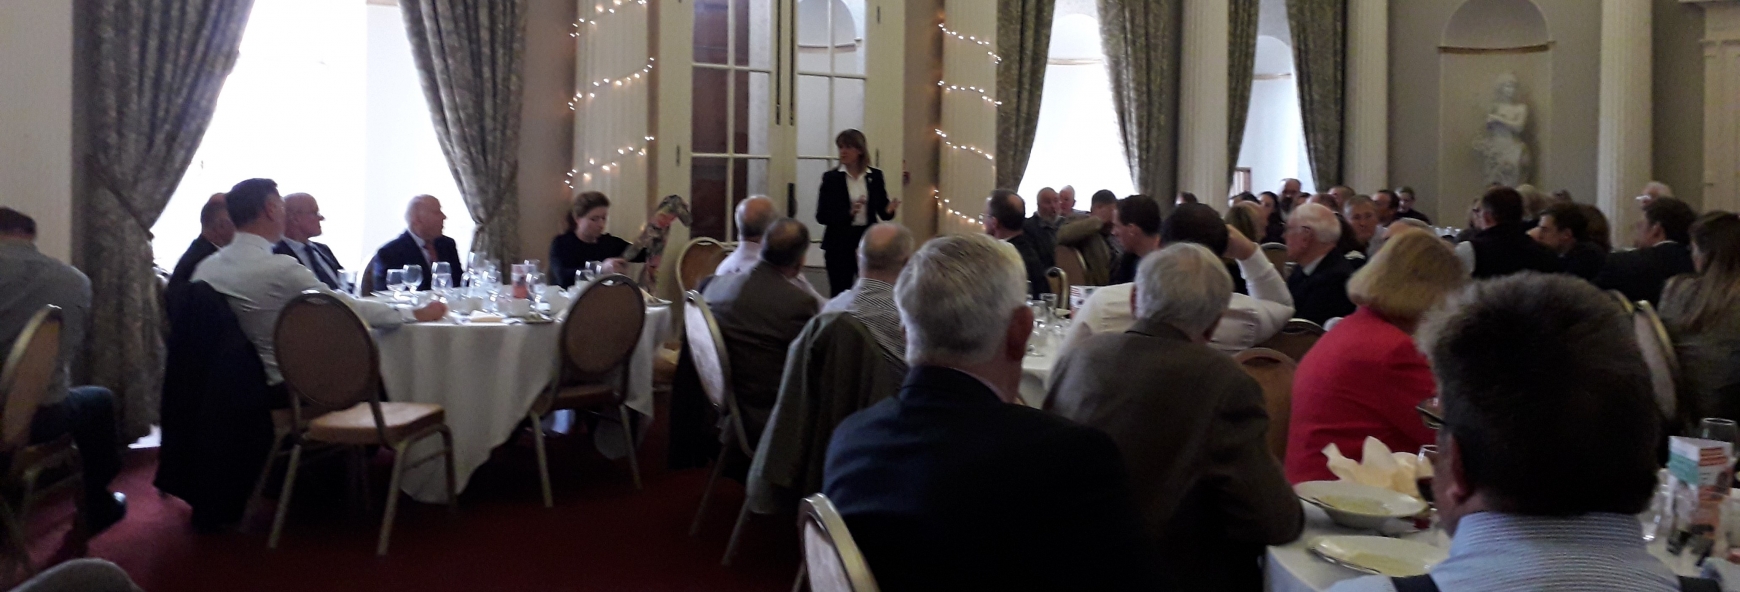 Minette Batters presenting at an AGM